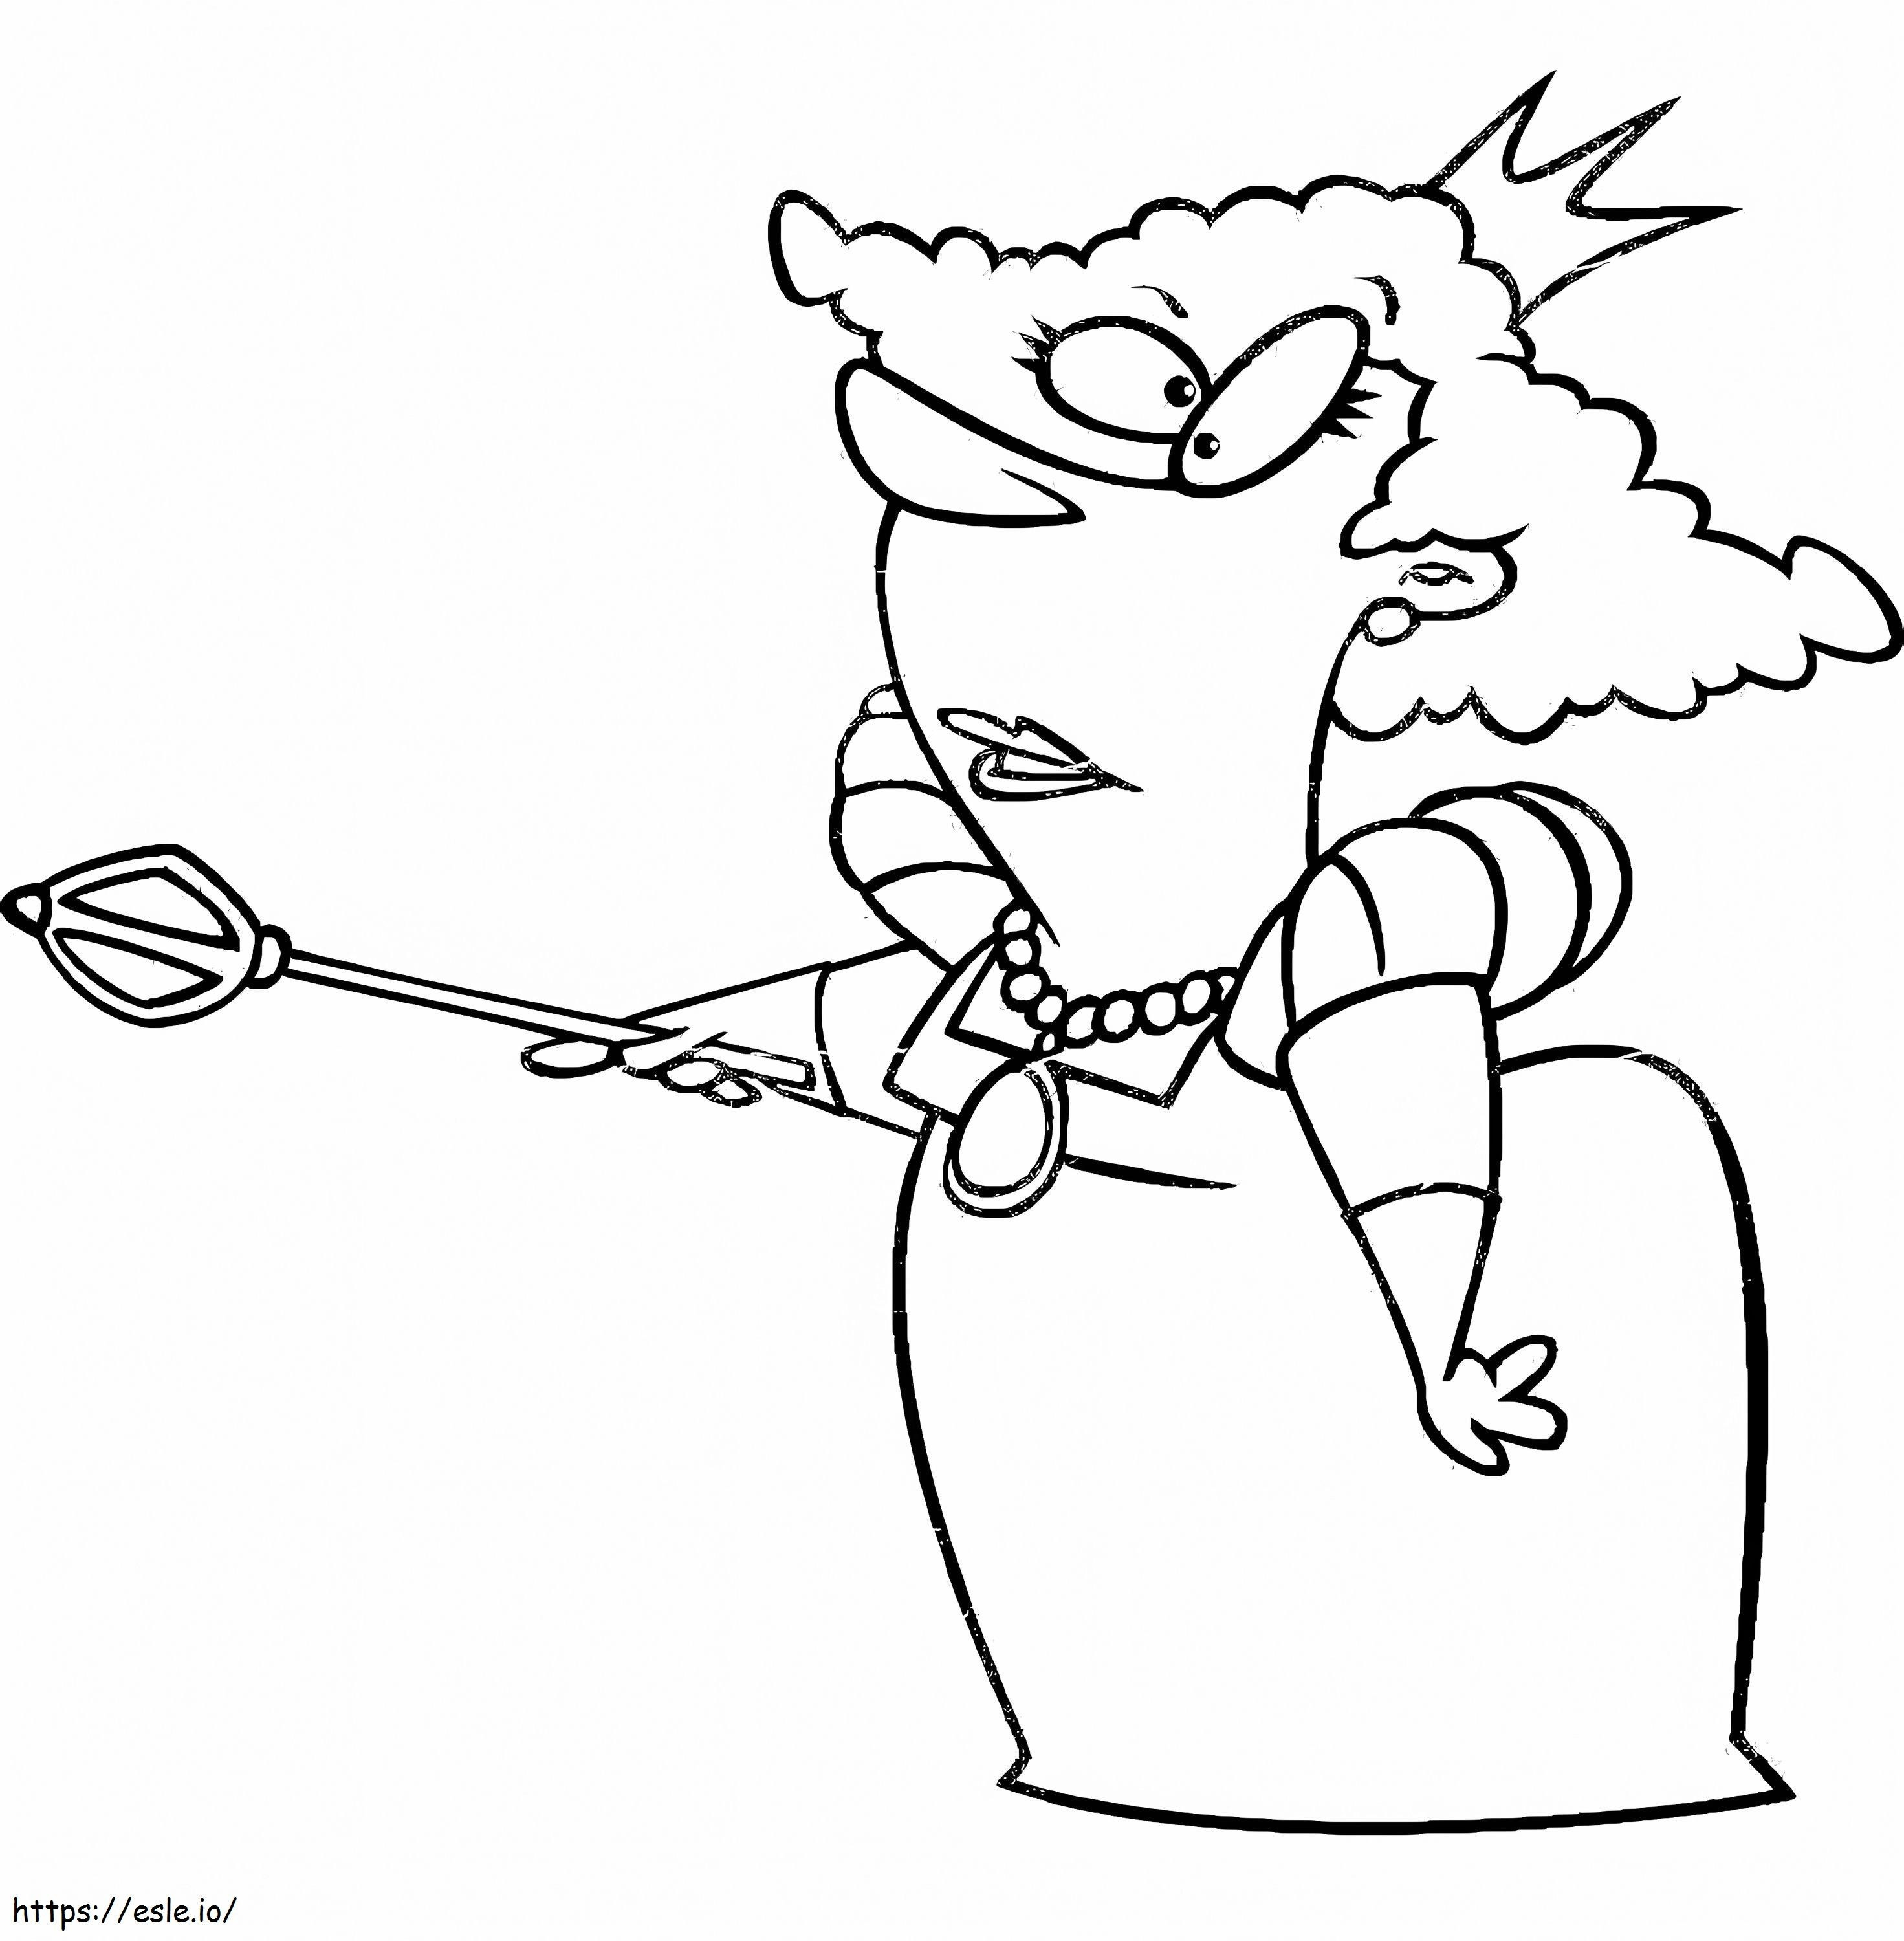 Funny Queen coloring page